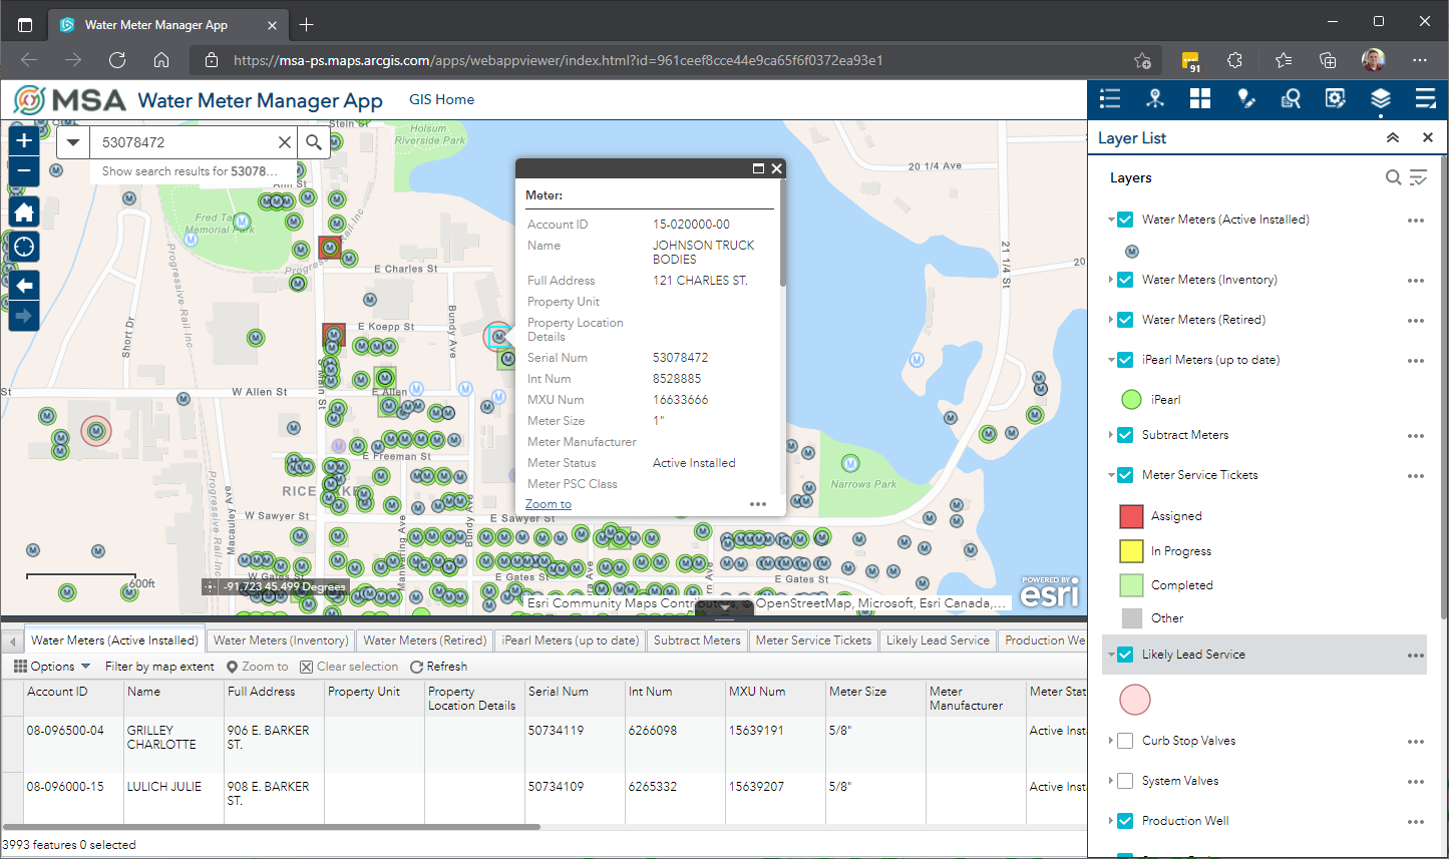 Screen shot of a water meter manager application, showing how GIS can be used to track residential lead services lines